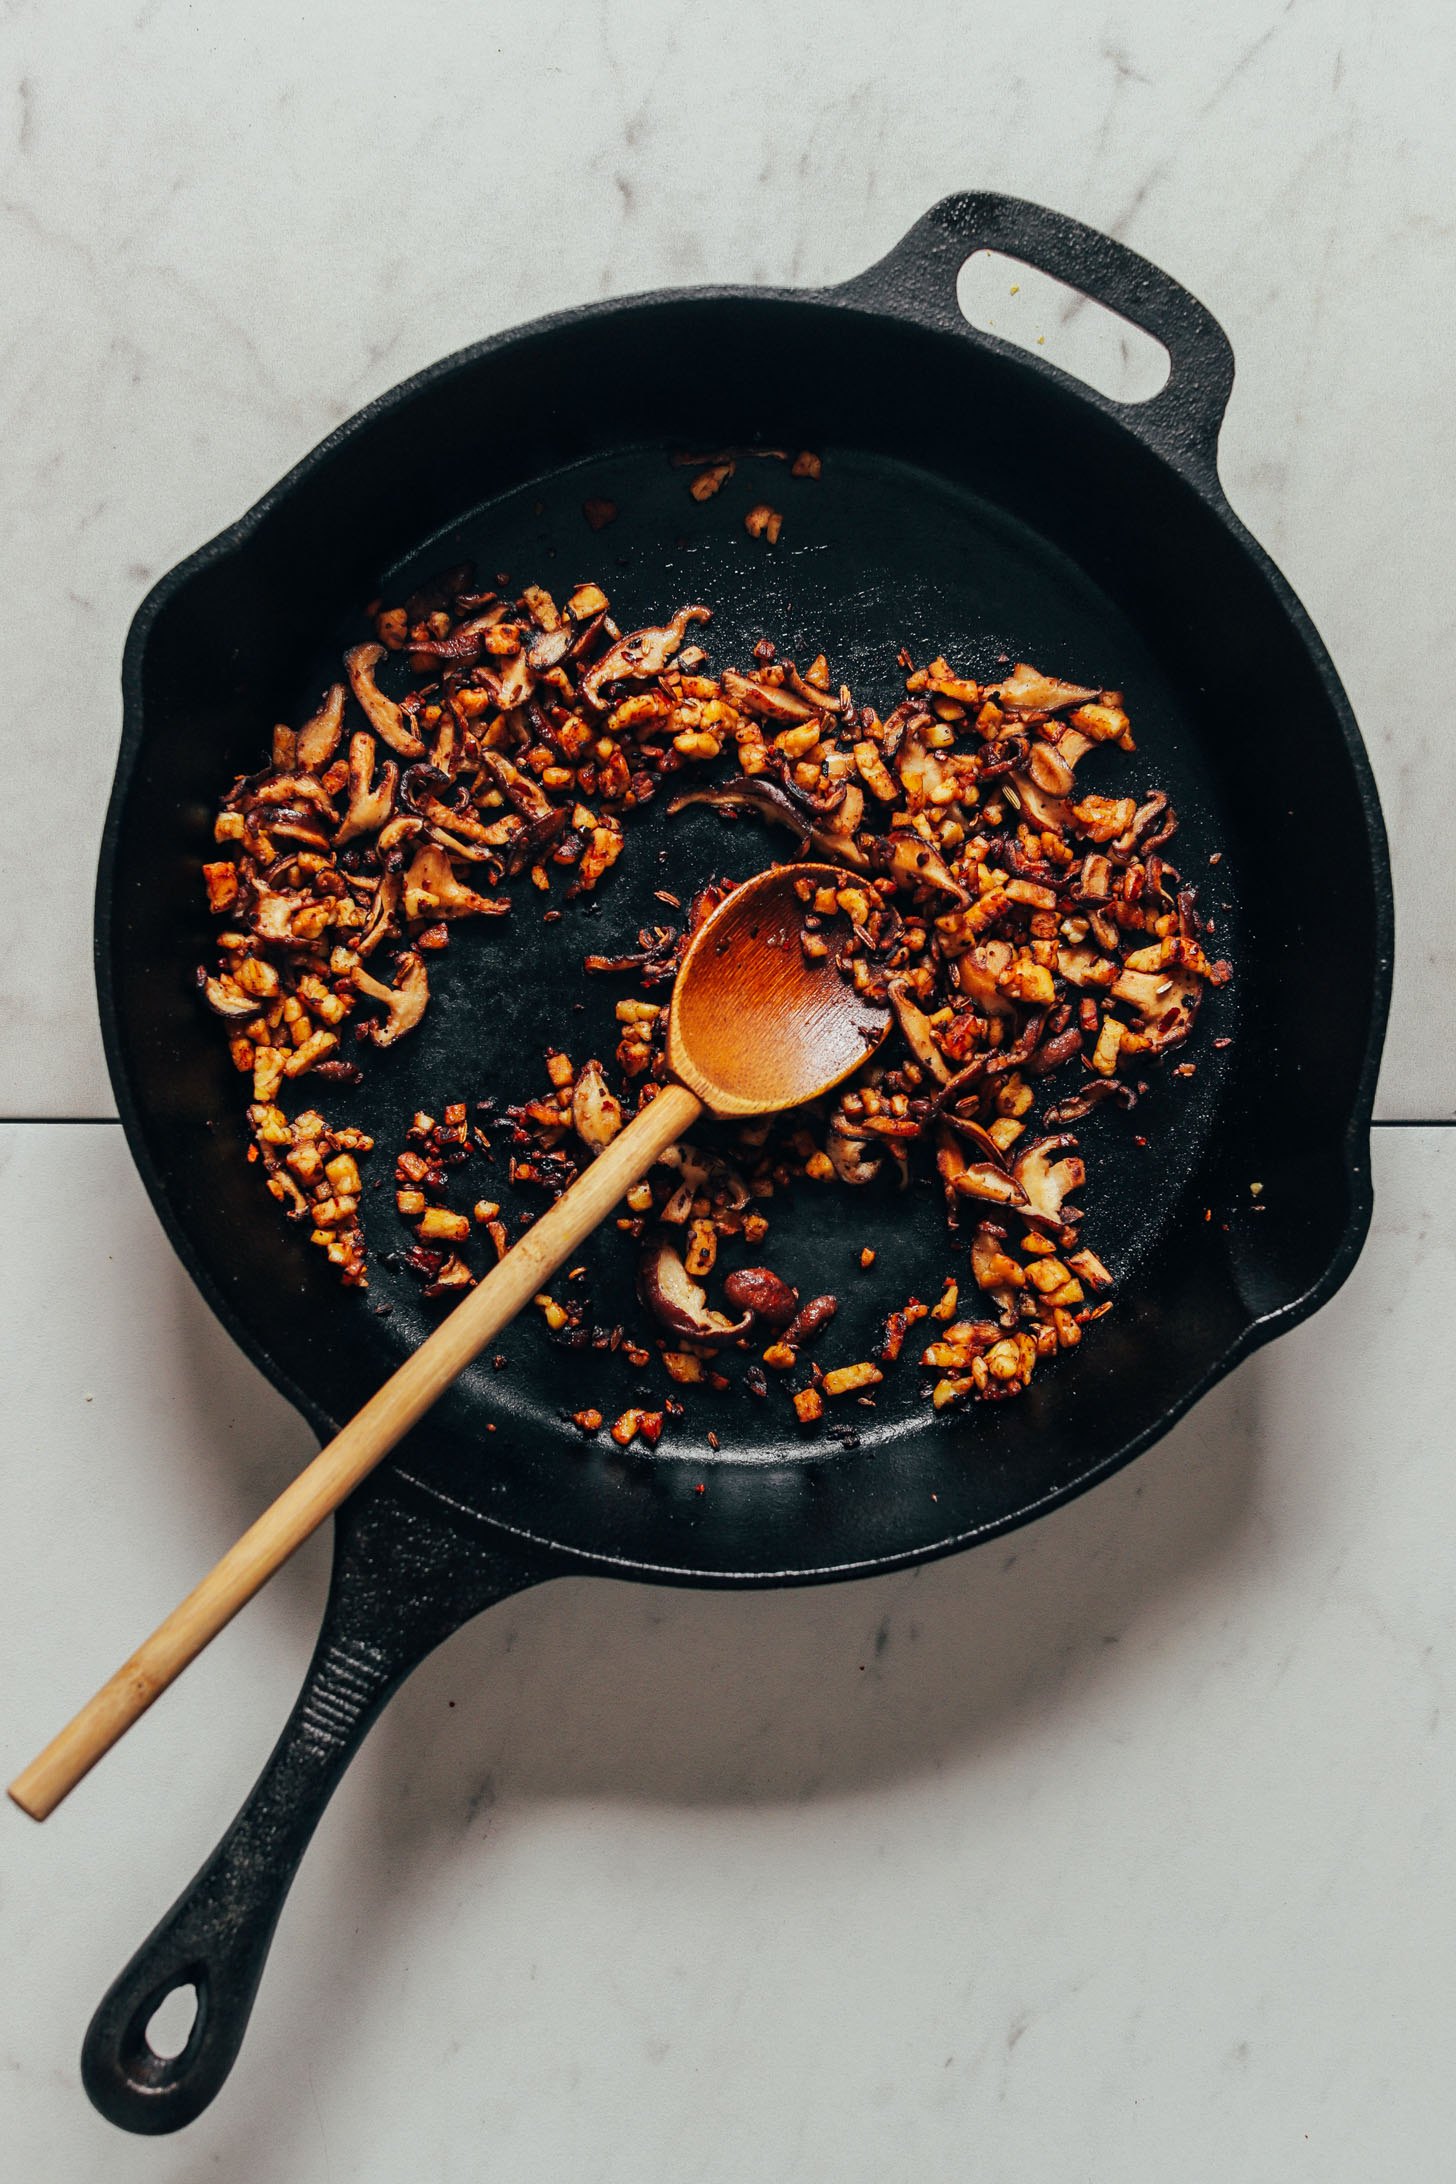 Using a wooden spoon to sauté mushrooms and tempeh in a cast-iron skillet